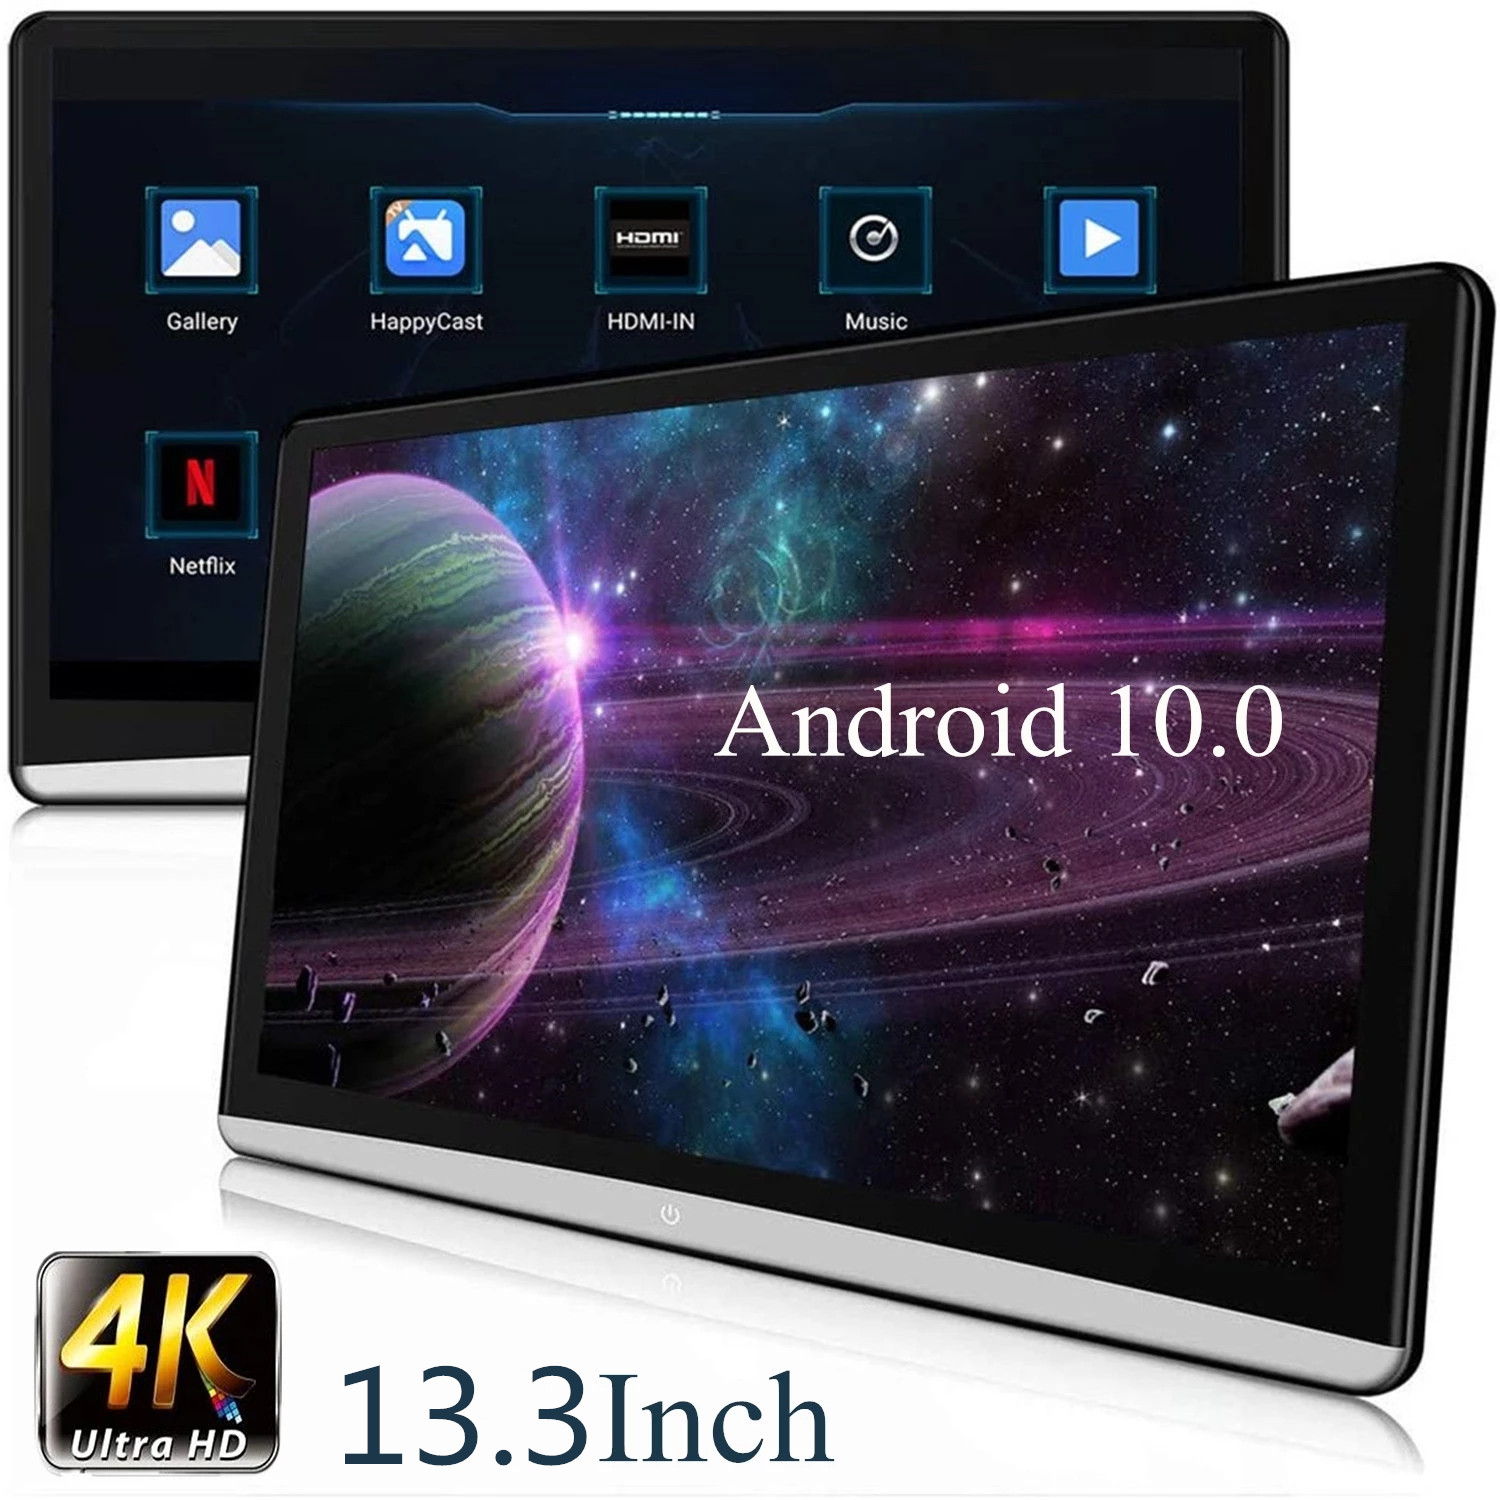 13.3 inch Android 10.0 Auto -headstang Monitor 4K 1080p Touchscreen WiFi/Bluetooth/USB/SD/HDMI/FM/Mirror Link/Miracas MP5 Player